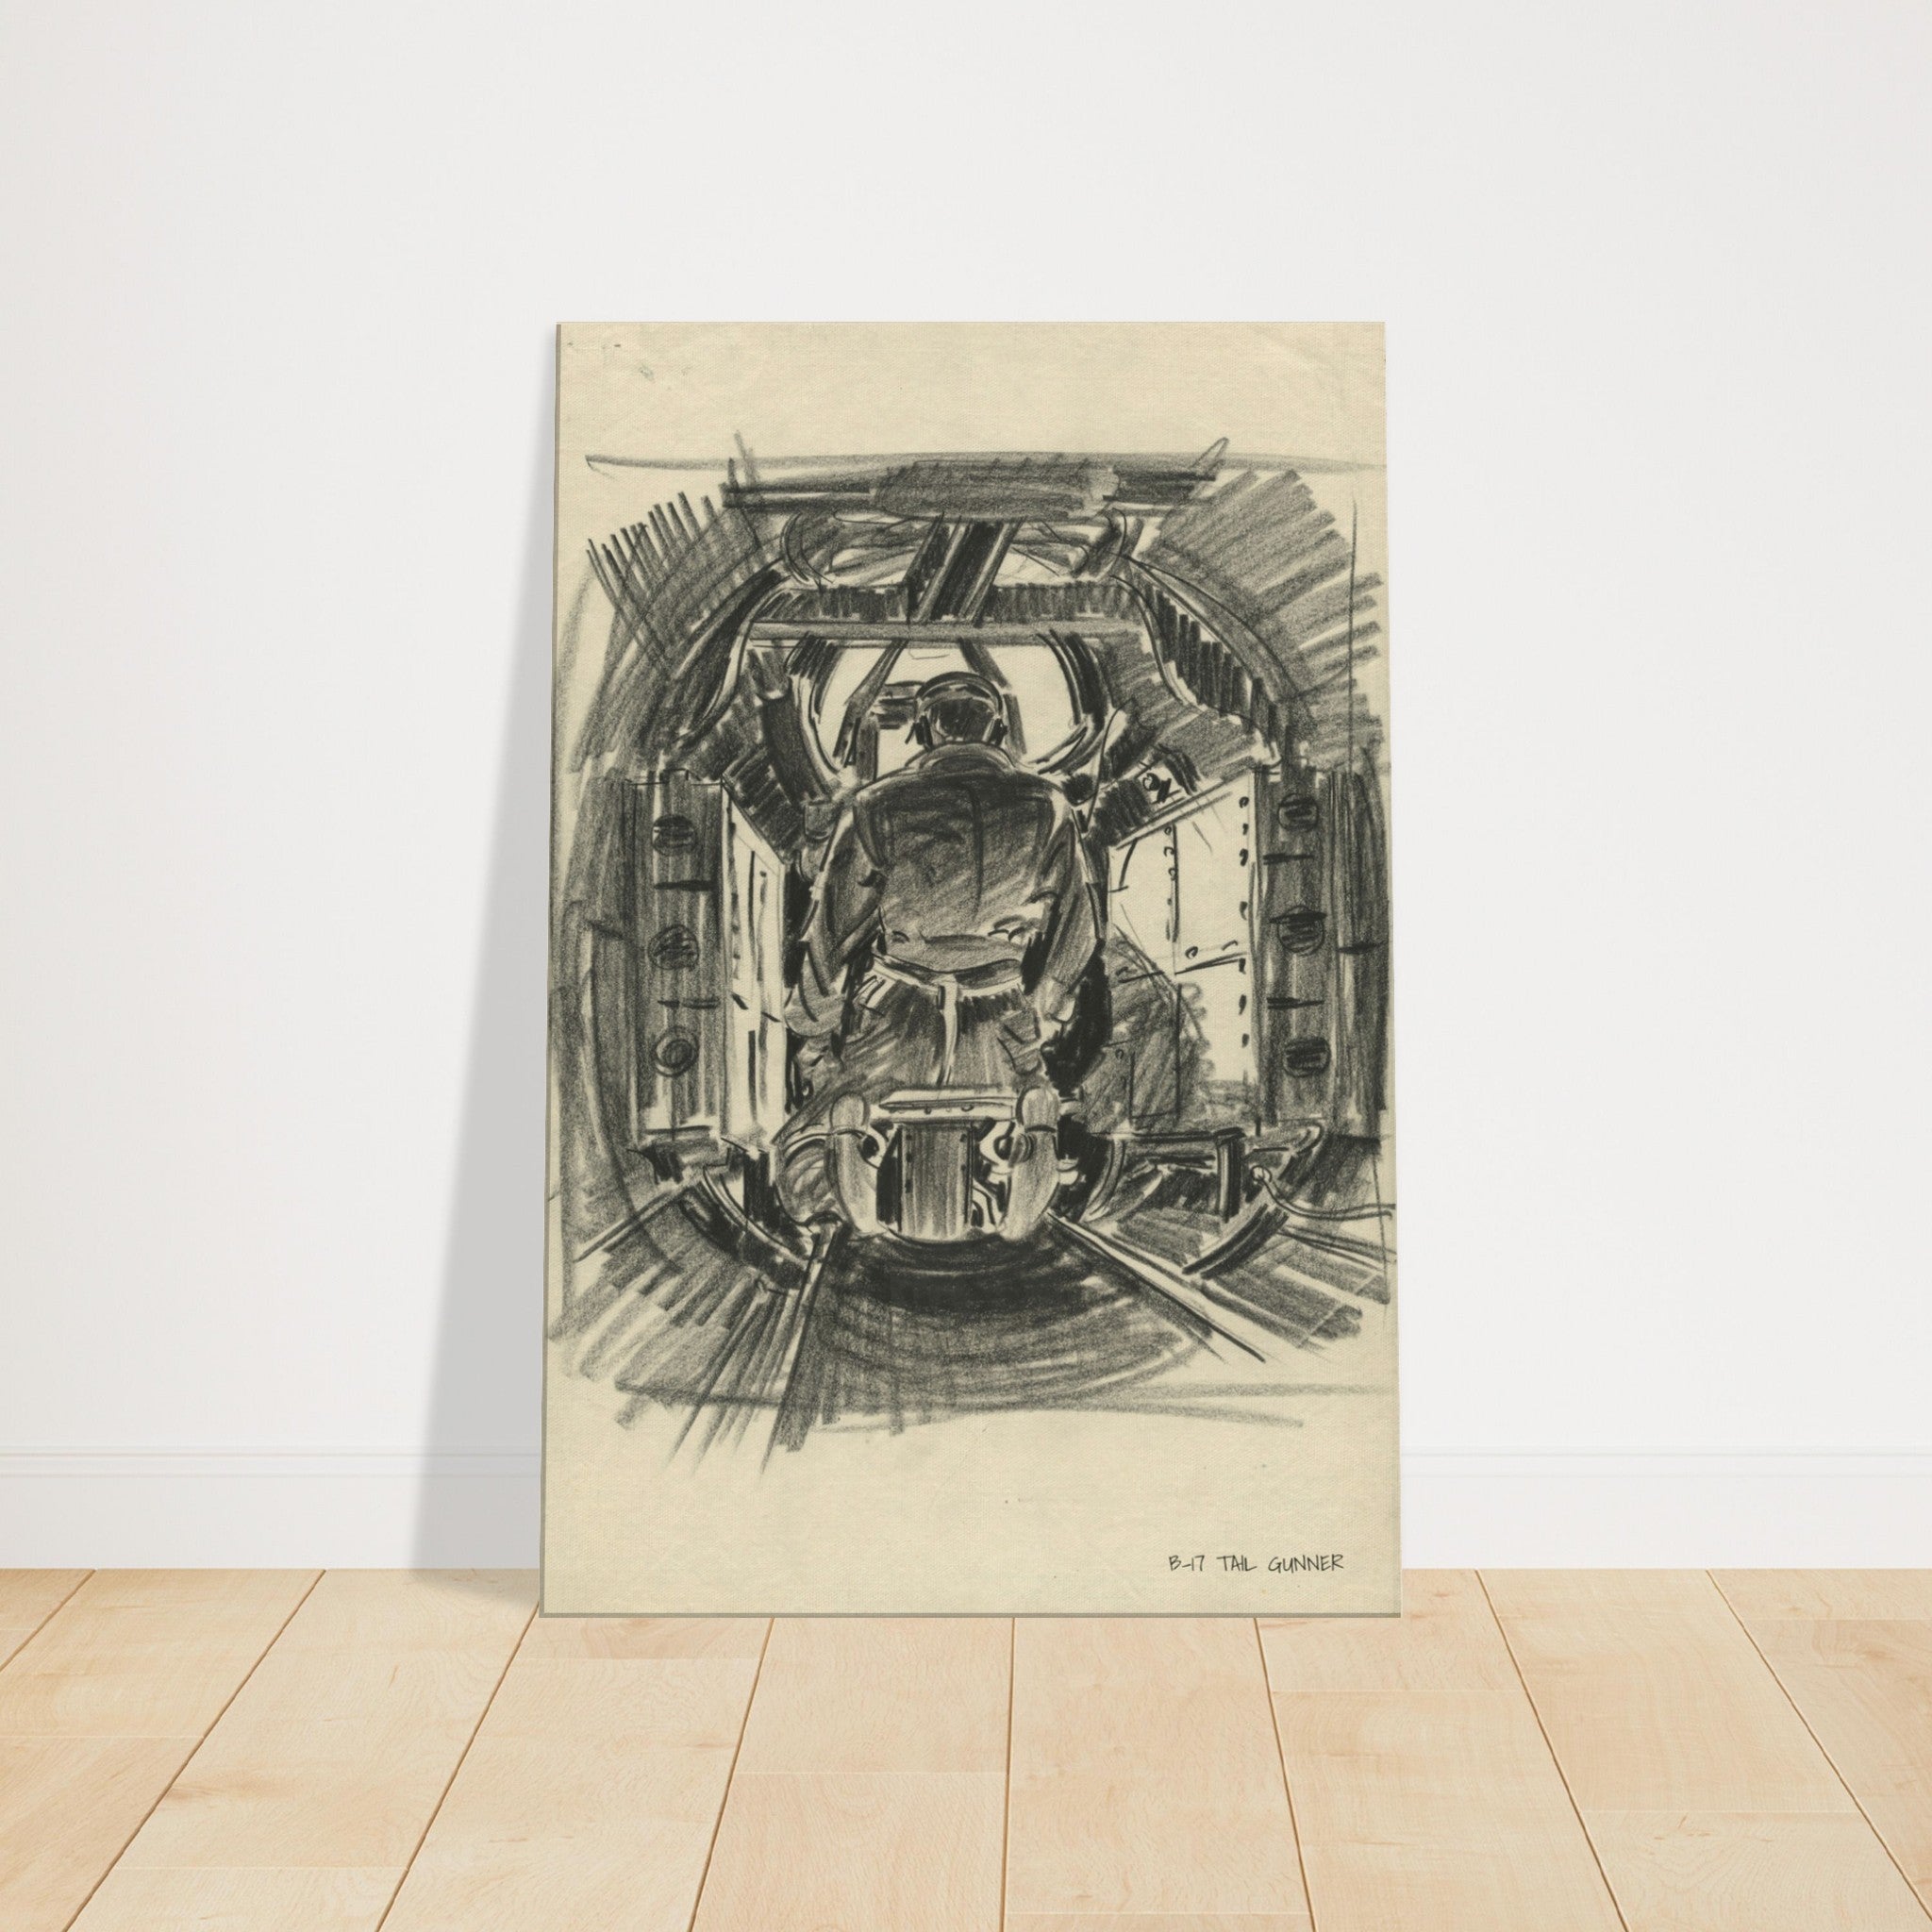 B-17 "Tail Gunner " Reproduction Charcoal Sketch On Canvas - I Love a Hangar